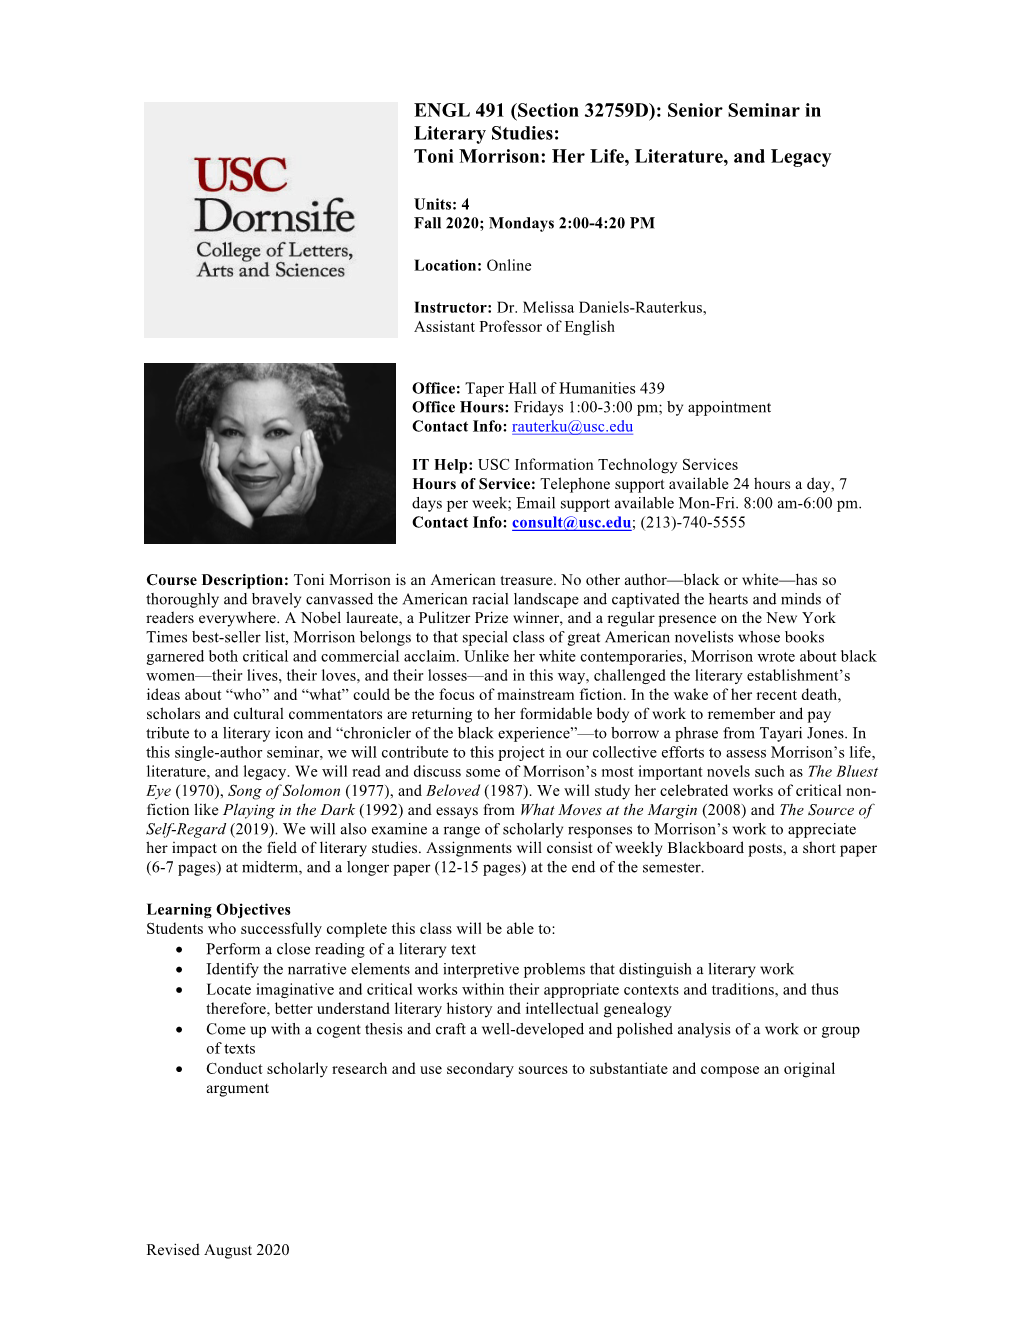 (Section 32759D): Senior Seminar in Literary Studies: Toni Morrison: Her Life, Literature, and Legacy